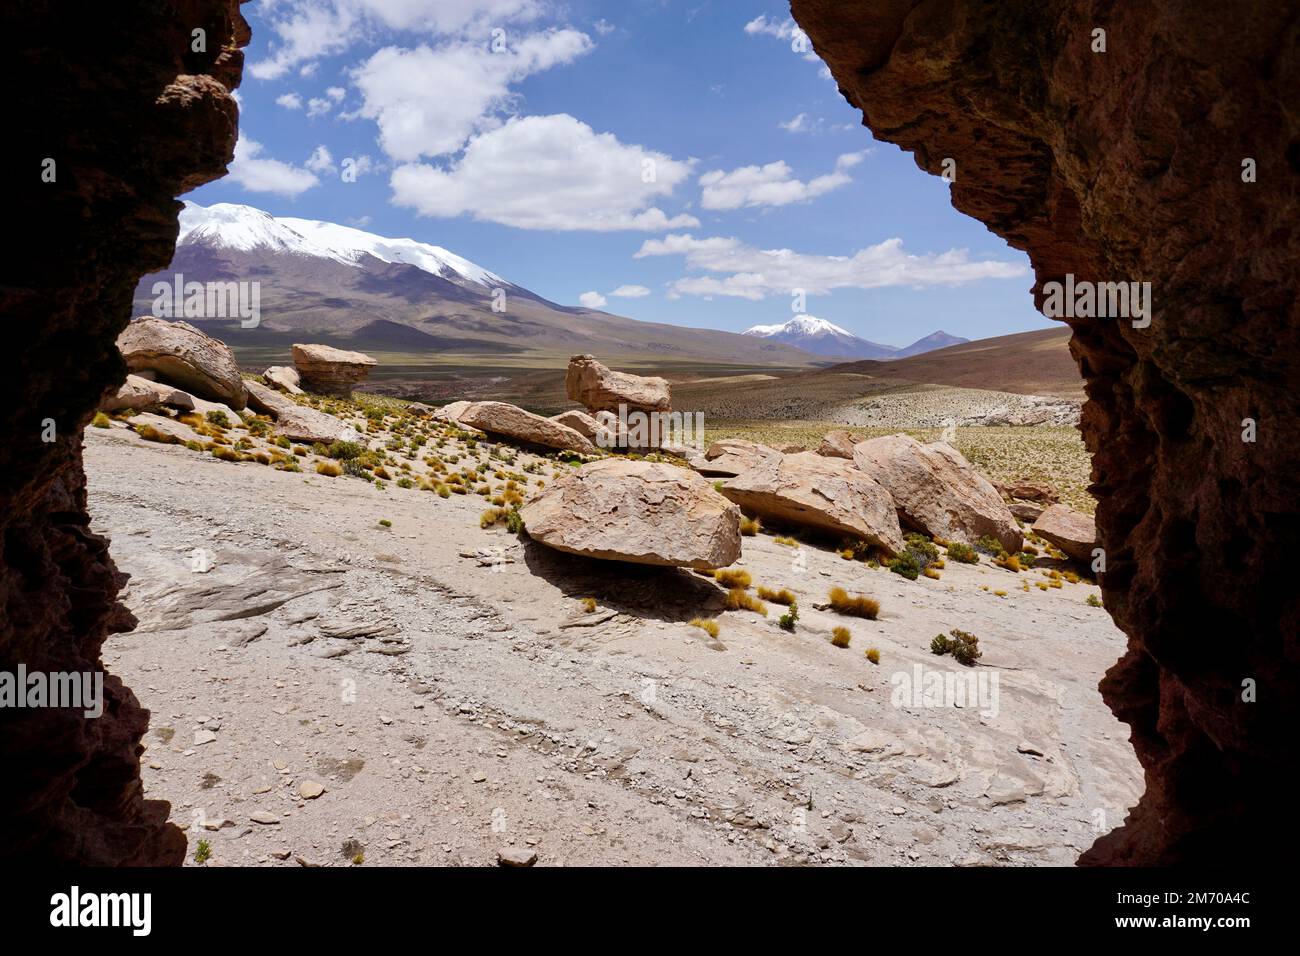 Rocks and grass with snowy mountains in the background in national reserve in Bolivia Stock Photo